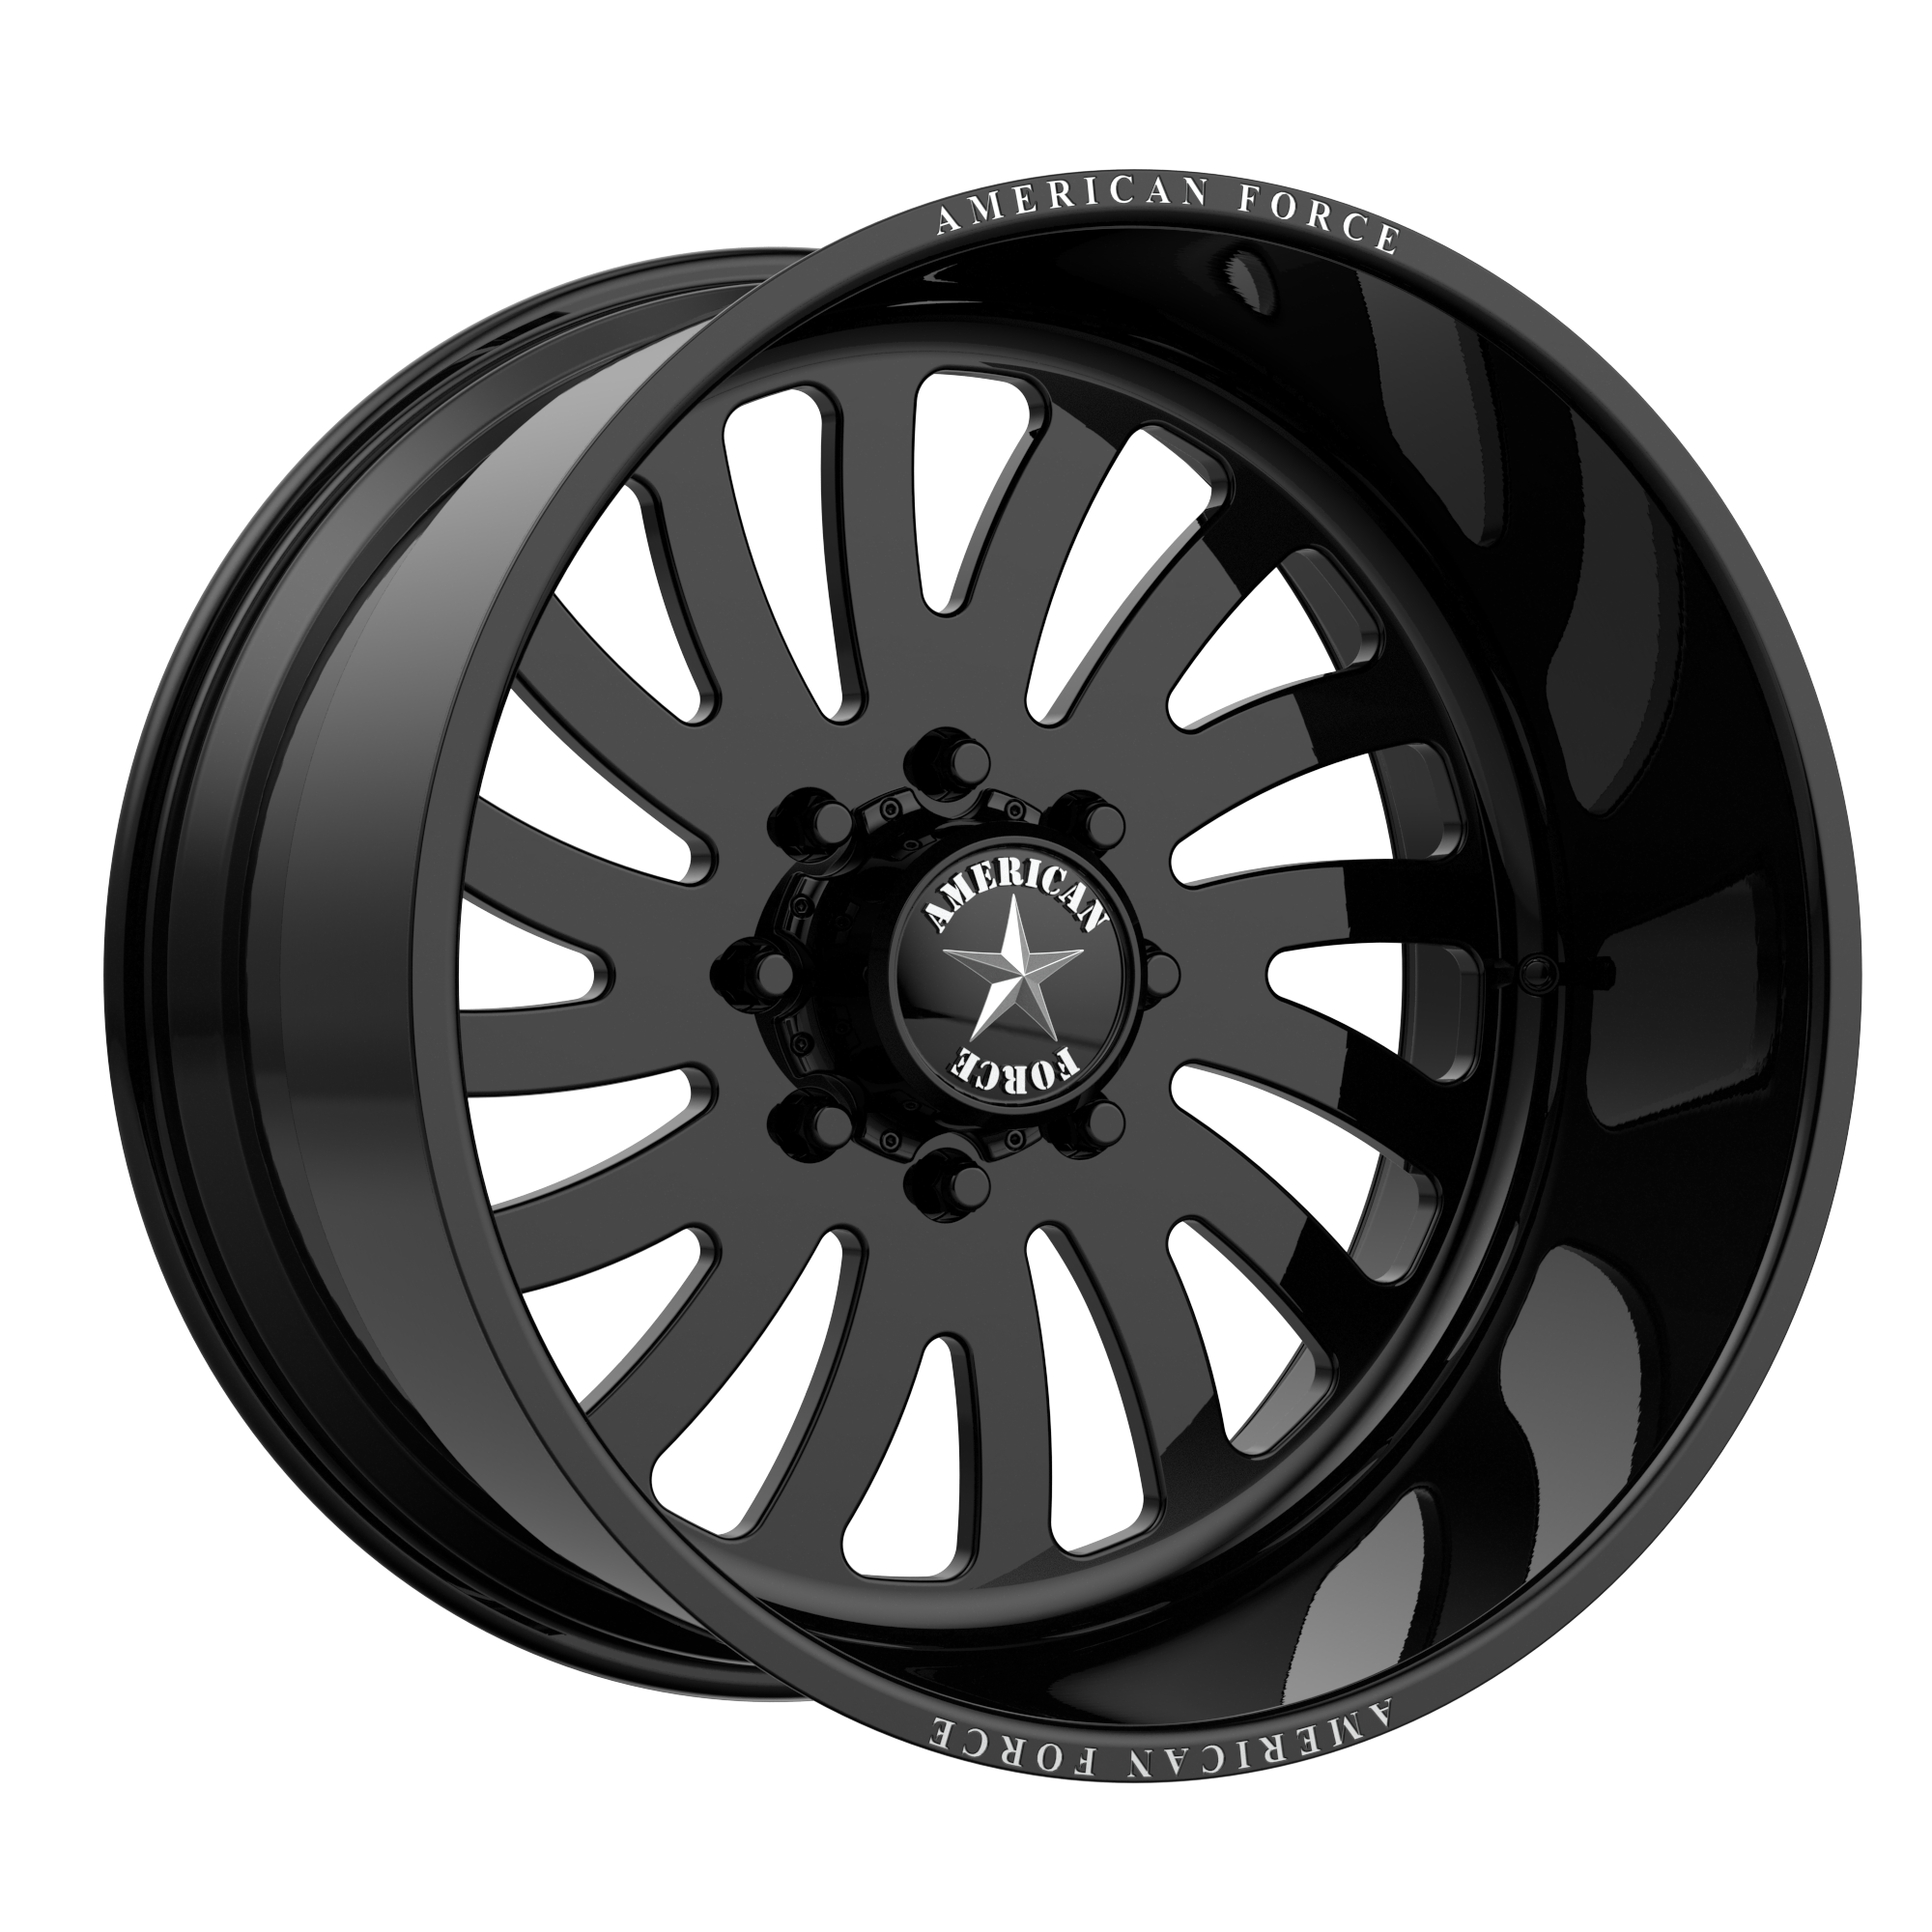 OCTANE SS 22x16 8x165.10 GLOSS BLACK MACHINED (-99 mm) - Tires and Engine Performance